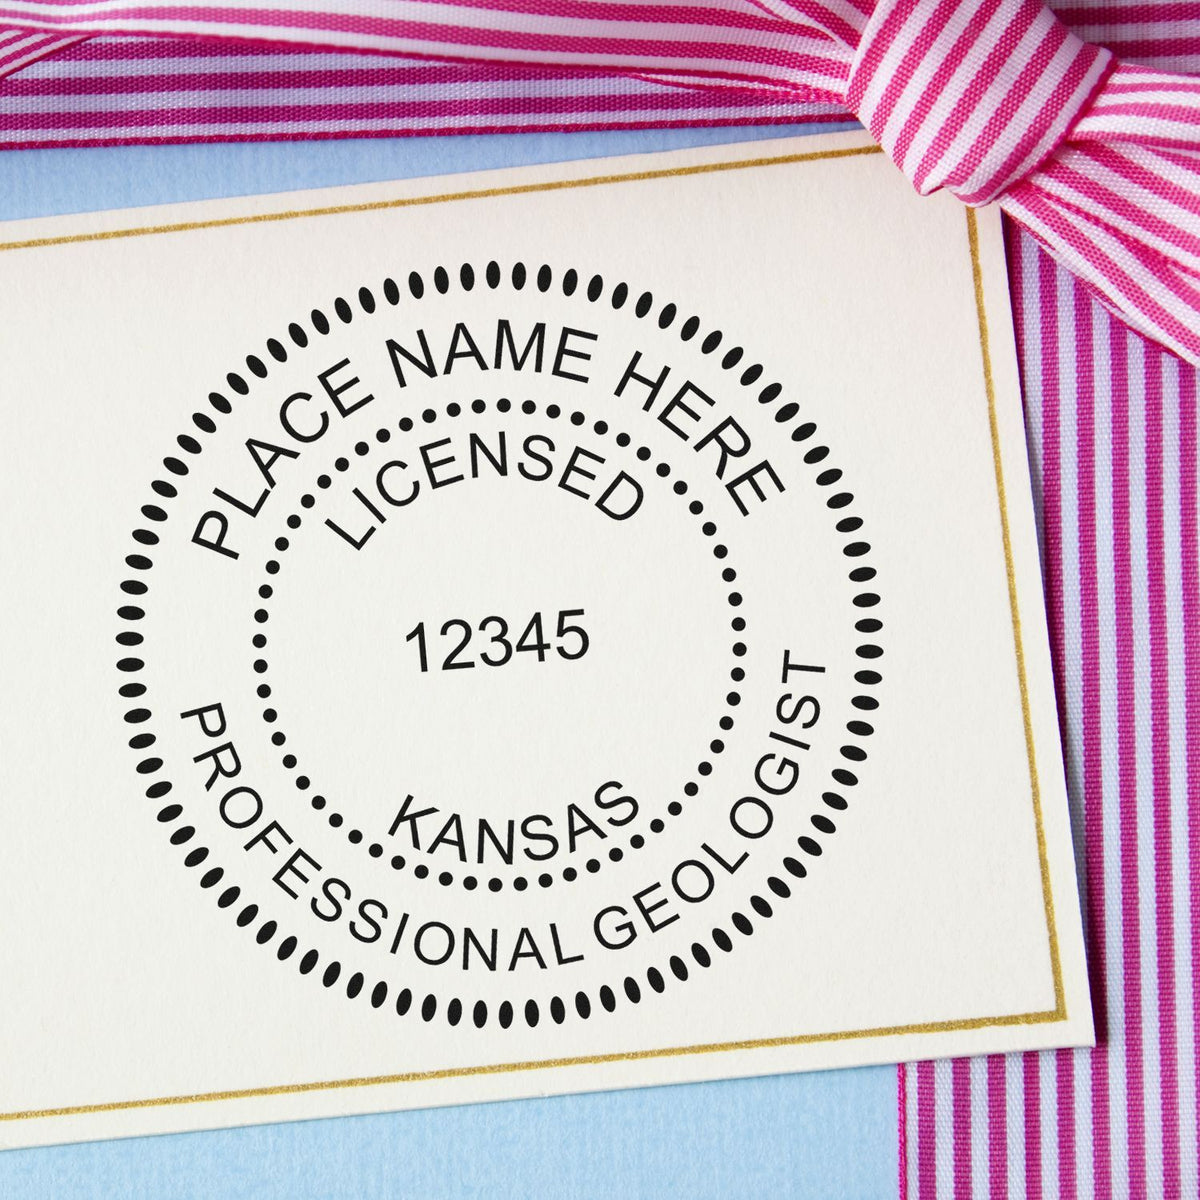 A photograph of the Kansas Professional Geologist Seal Stamp stamp impression reveals a vivid, professional image of the on paper.